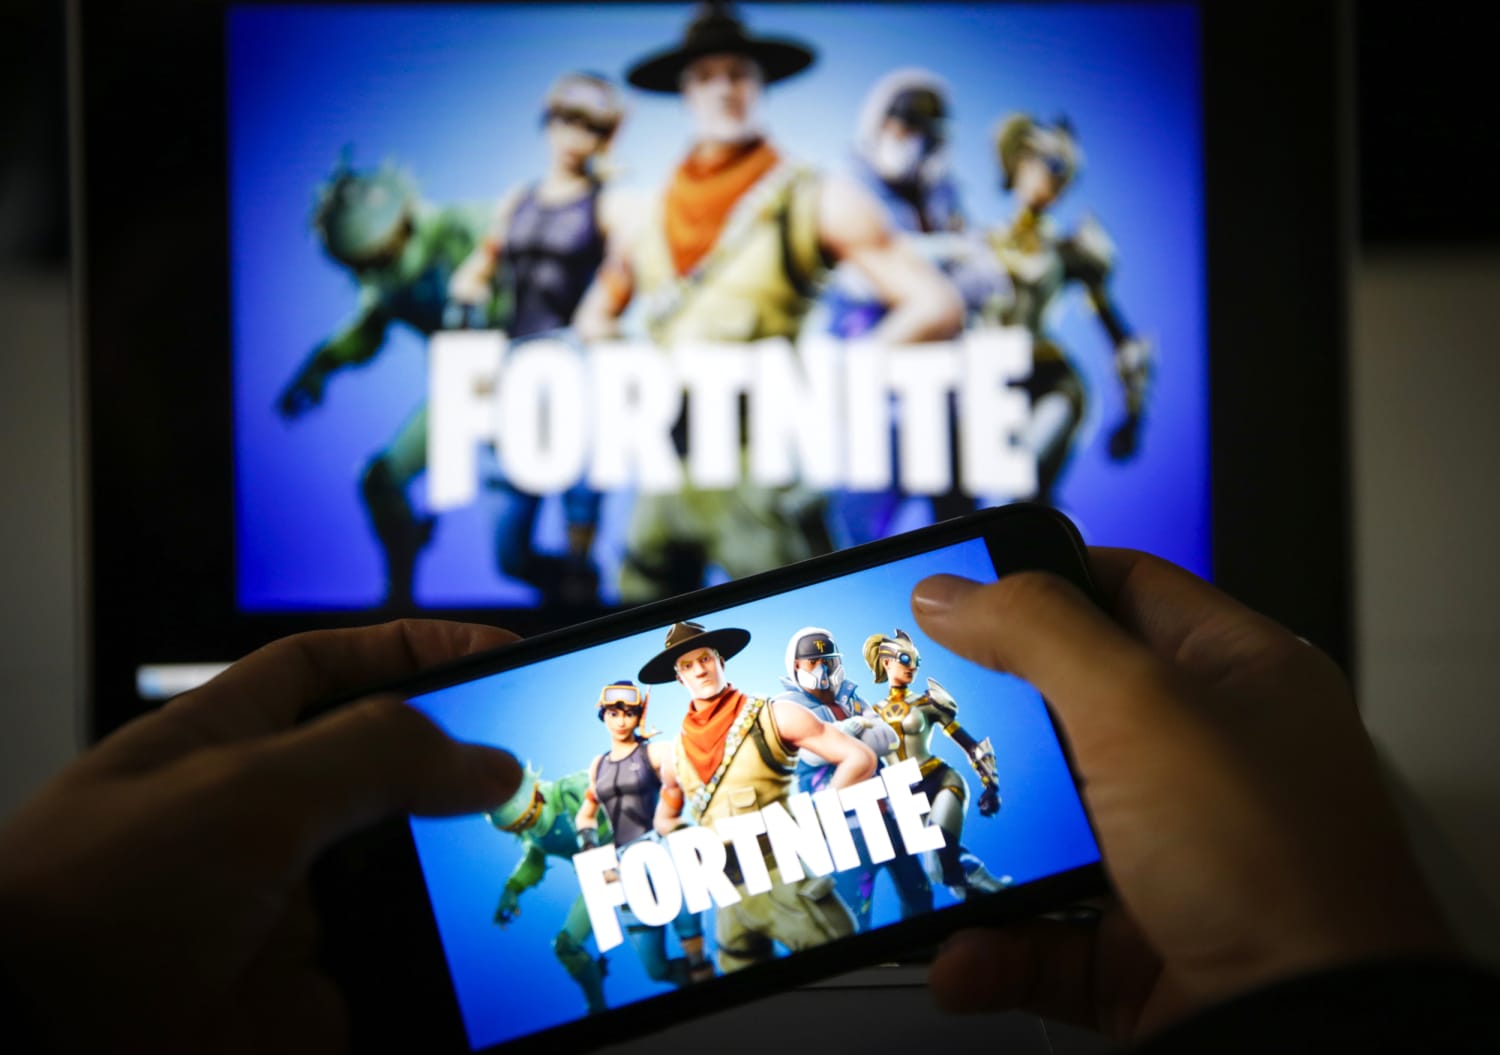 Explained: Why Apple and Google removed Epic Games' Fortnite from